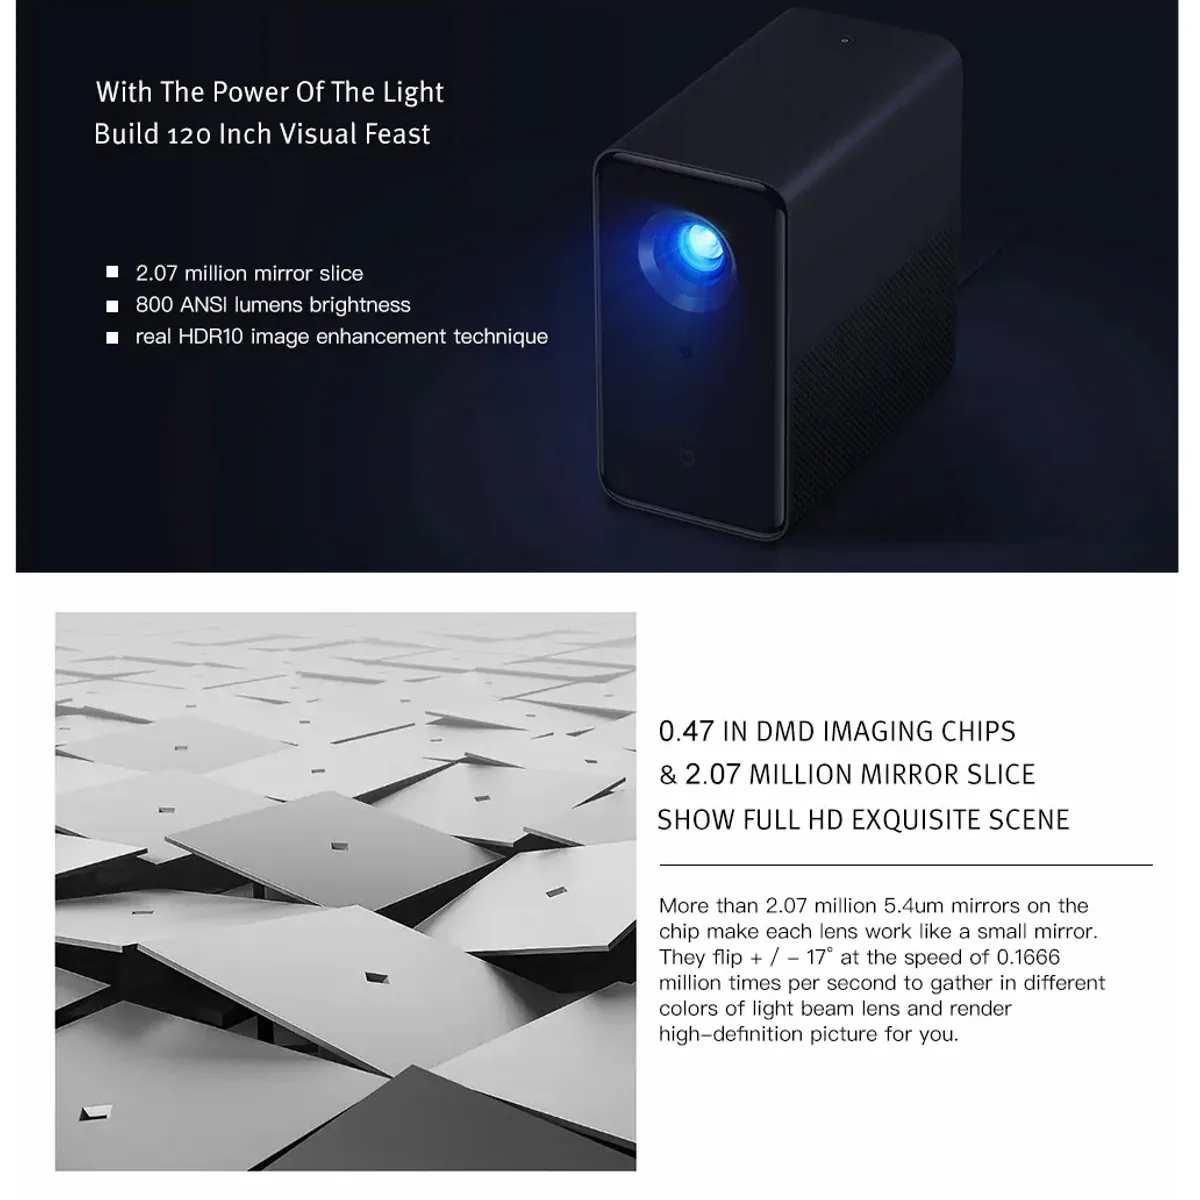 Xiaomi Mijia Projector TV 3500 Lumens HD DLP WiFi bluetooth 4.1 Mi Projector Support 4K for Home Theater 3D Android